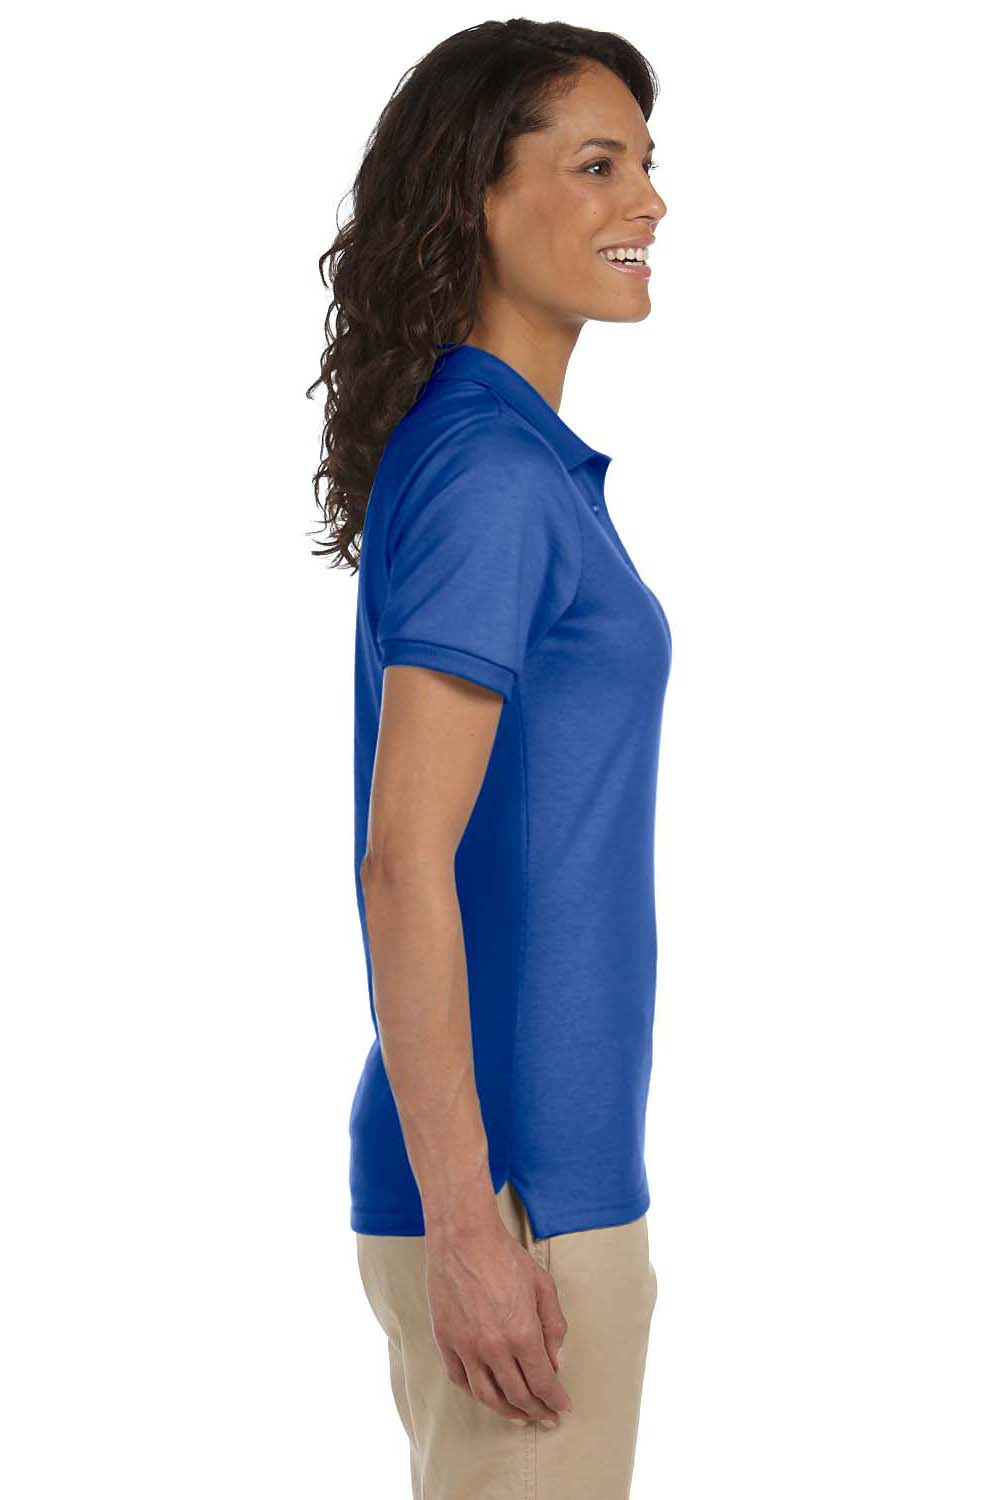 Jerzees 437W Womens SpotShield Stain Resistant Short Sleeve Polo Shirt Royal Blue Side